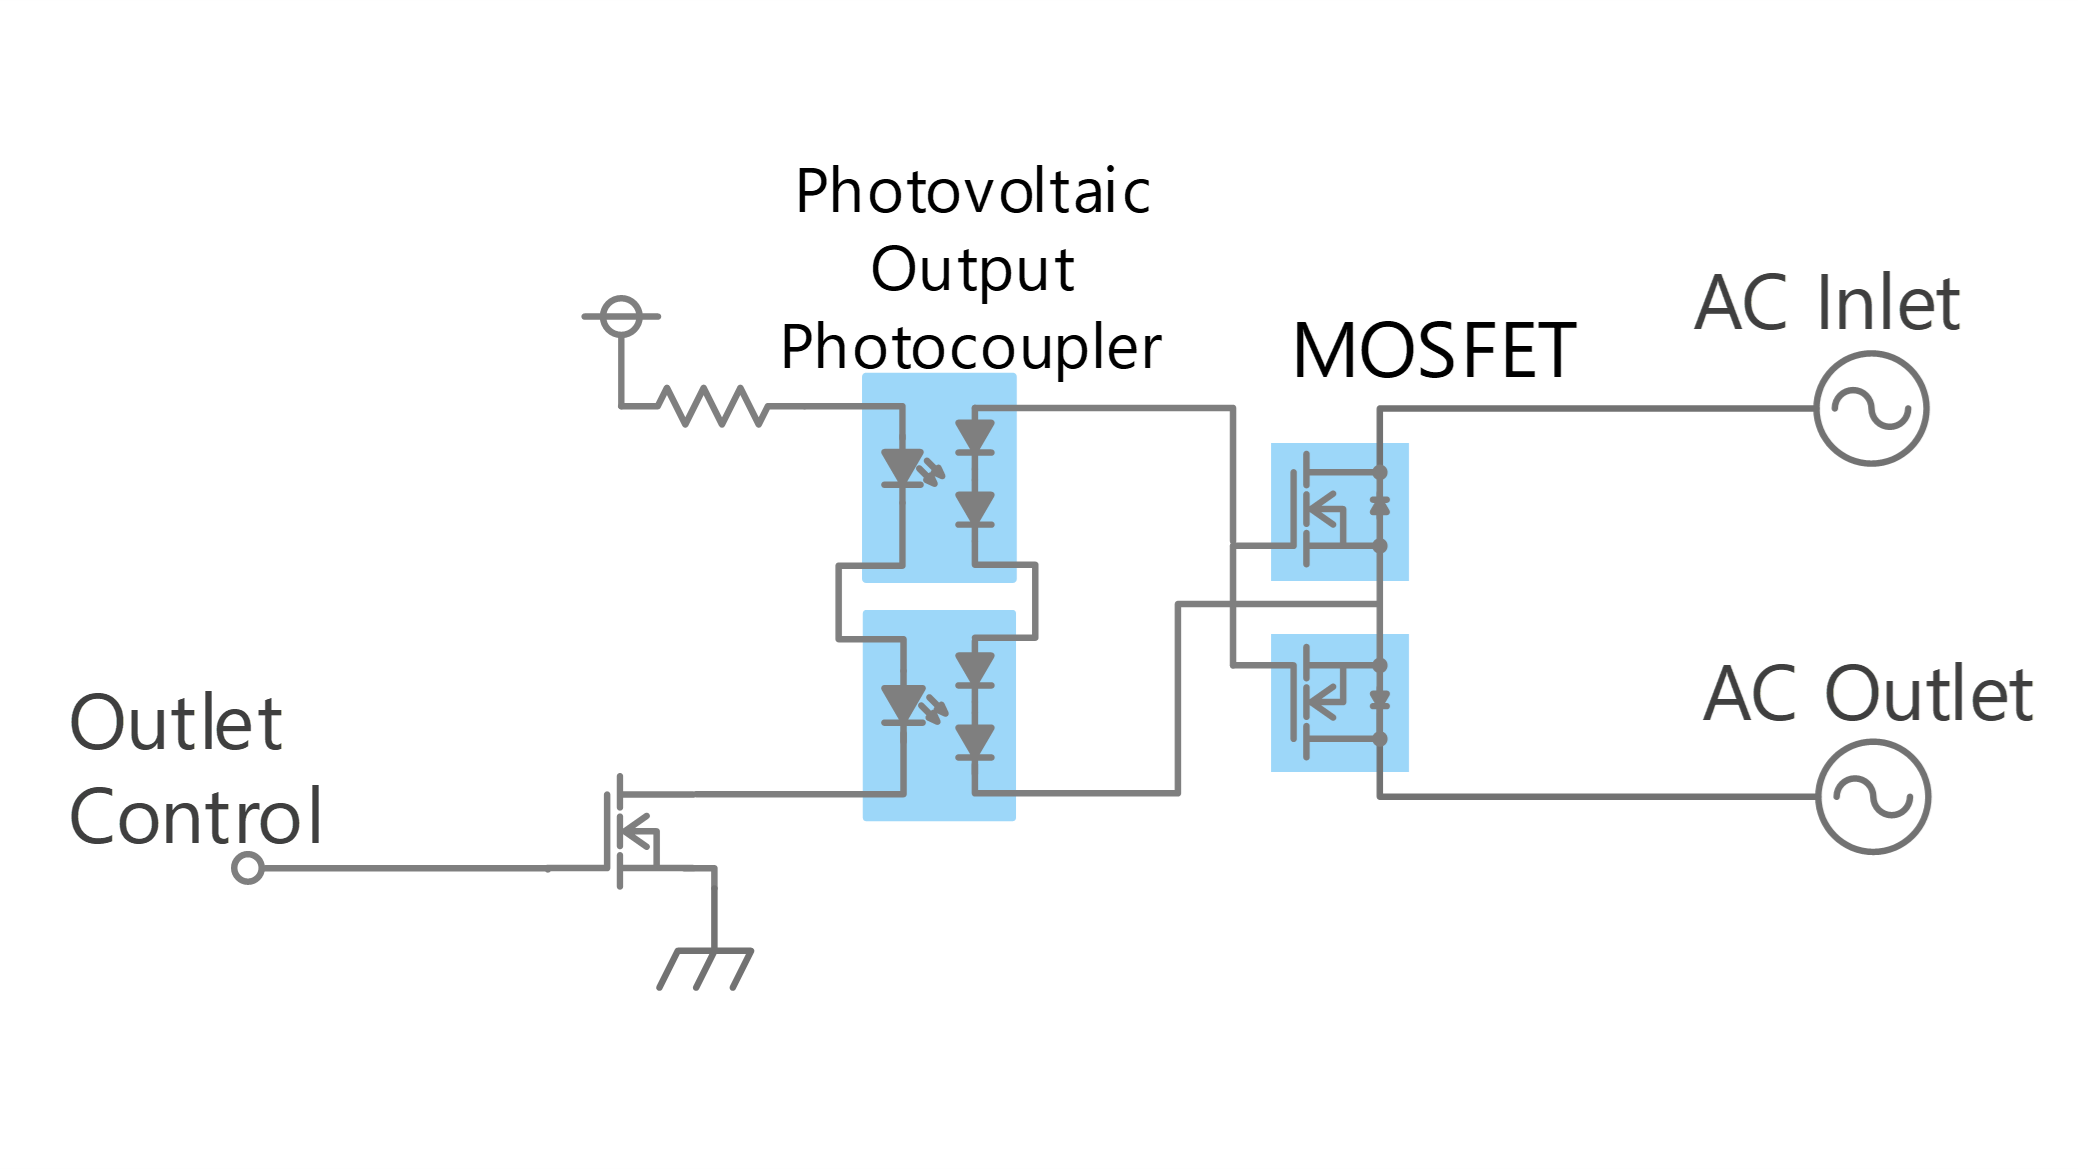 AC switch example using photovoltaic coupler and MOSFET  (for currents around 0.3A~1A)